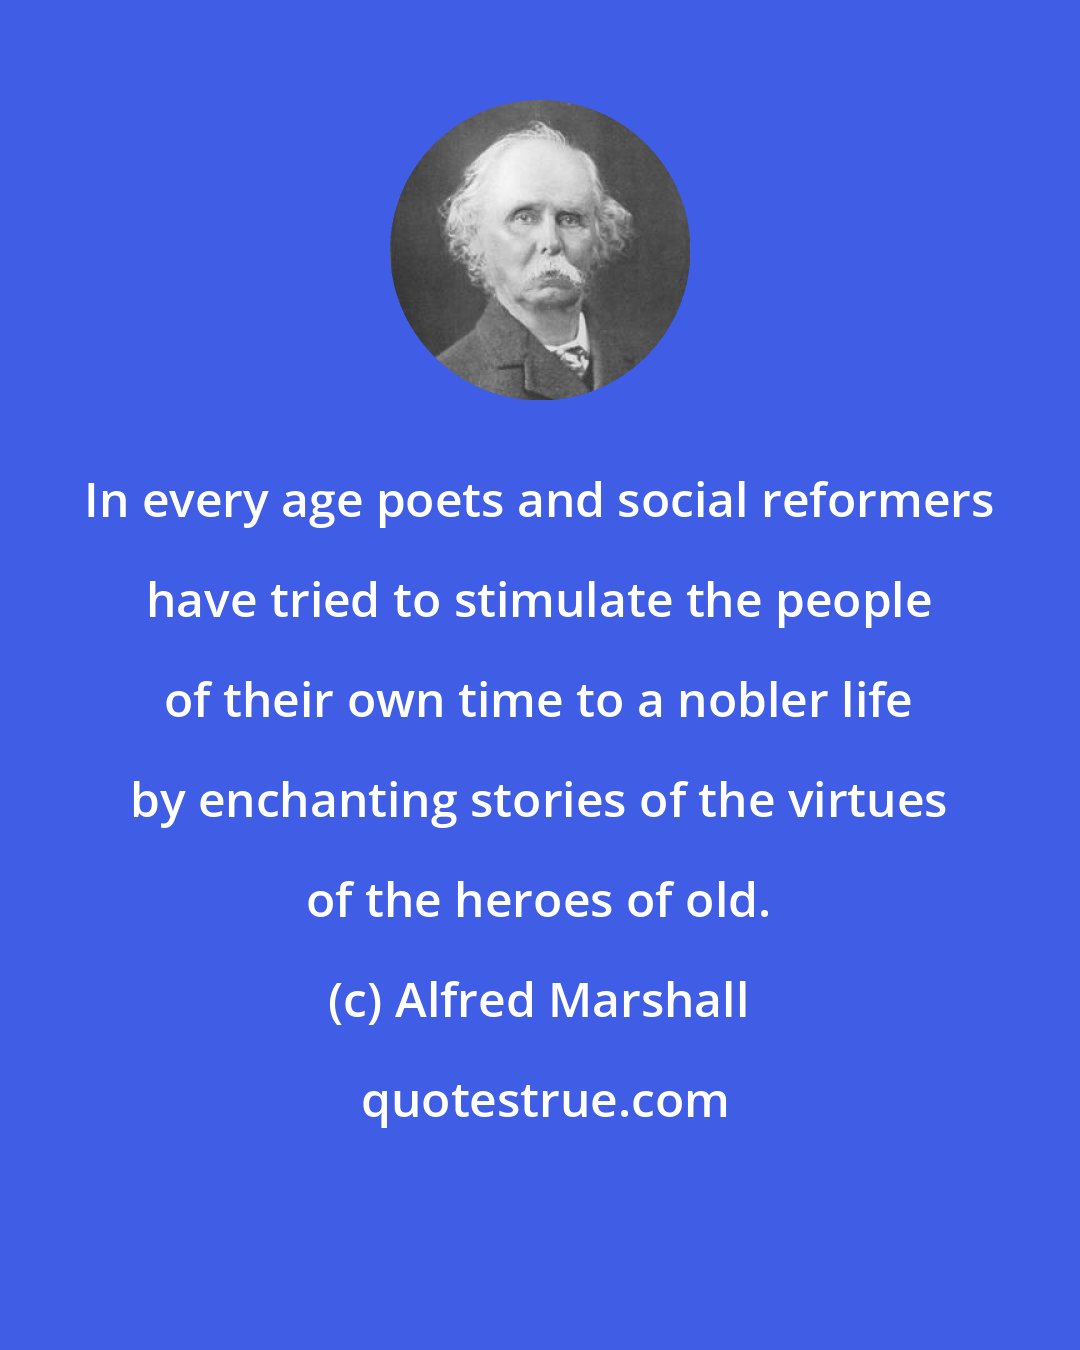 Alfred Marshall: In every age poets and social reformers have tried to stimulate the people of their own time to a nobler life by enchanting stories of the virtues of the heroes of old.